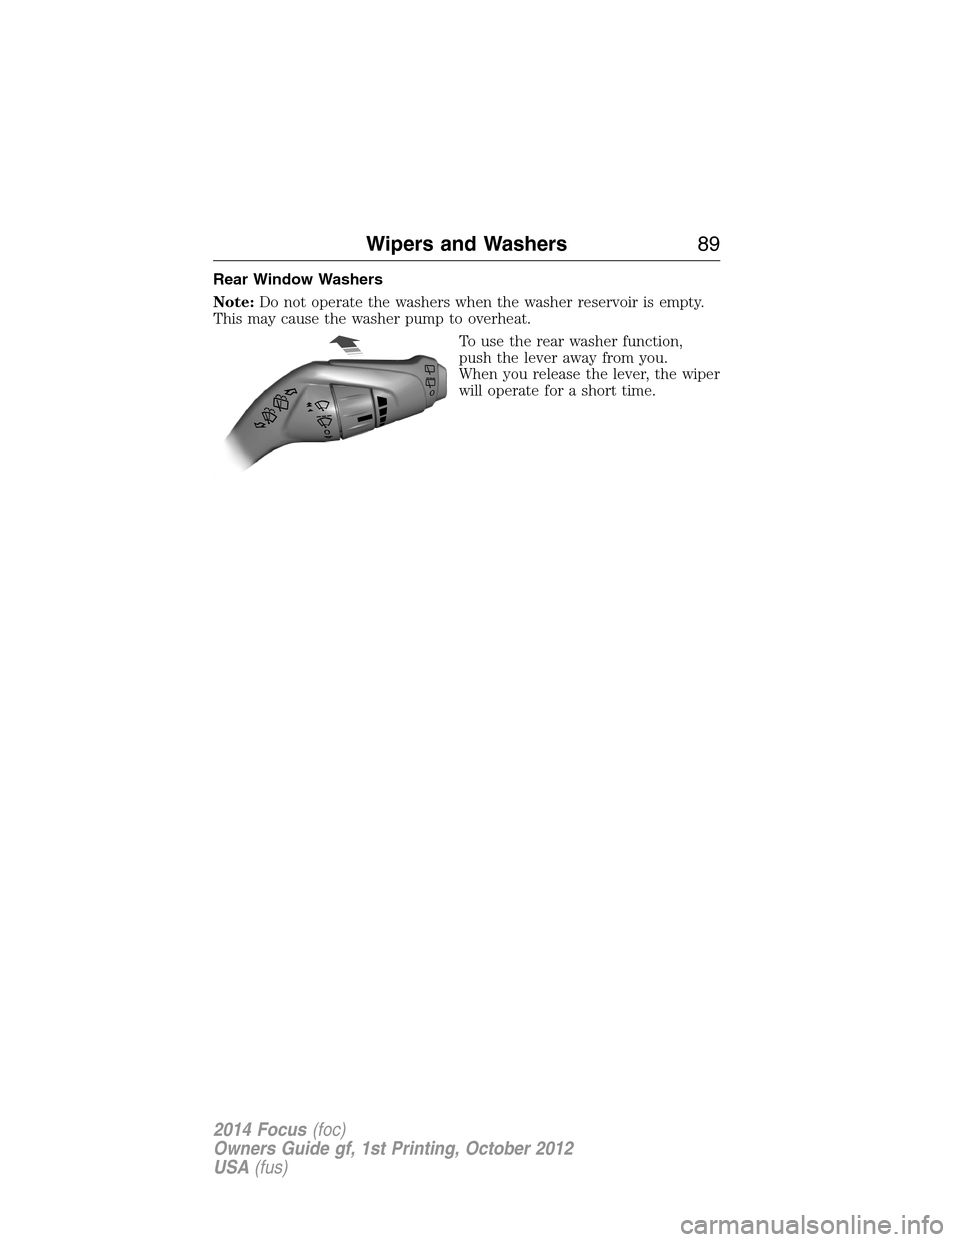 FORD FOCUS 2014 3.G Owners Manual Rear Window Washers
Note:Do not operate the washers when the washer reservoir is empty.
This may cause the washer pump to overheat.
To use the rear washer function,
push the lever away from you.
When 